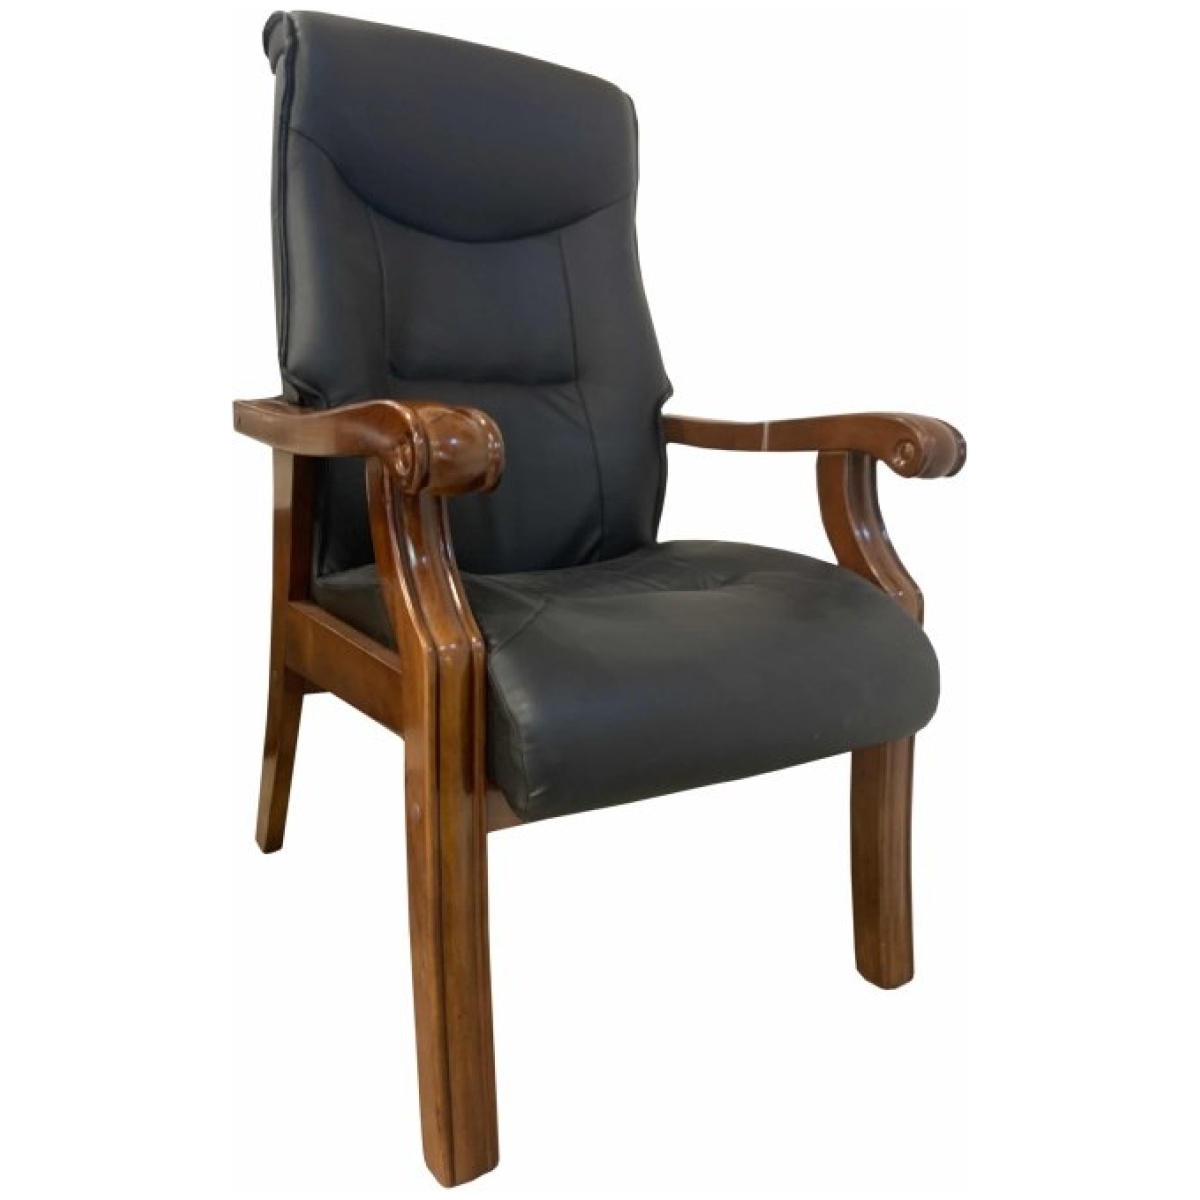 Black Leather Meeting Chair